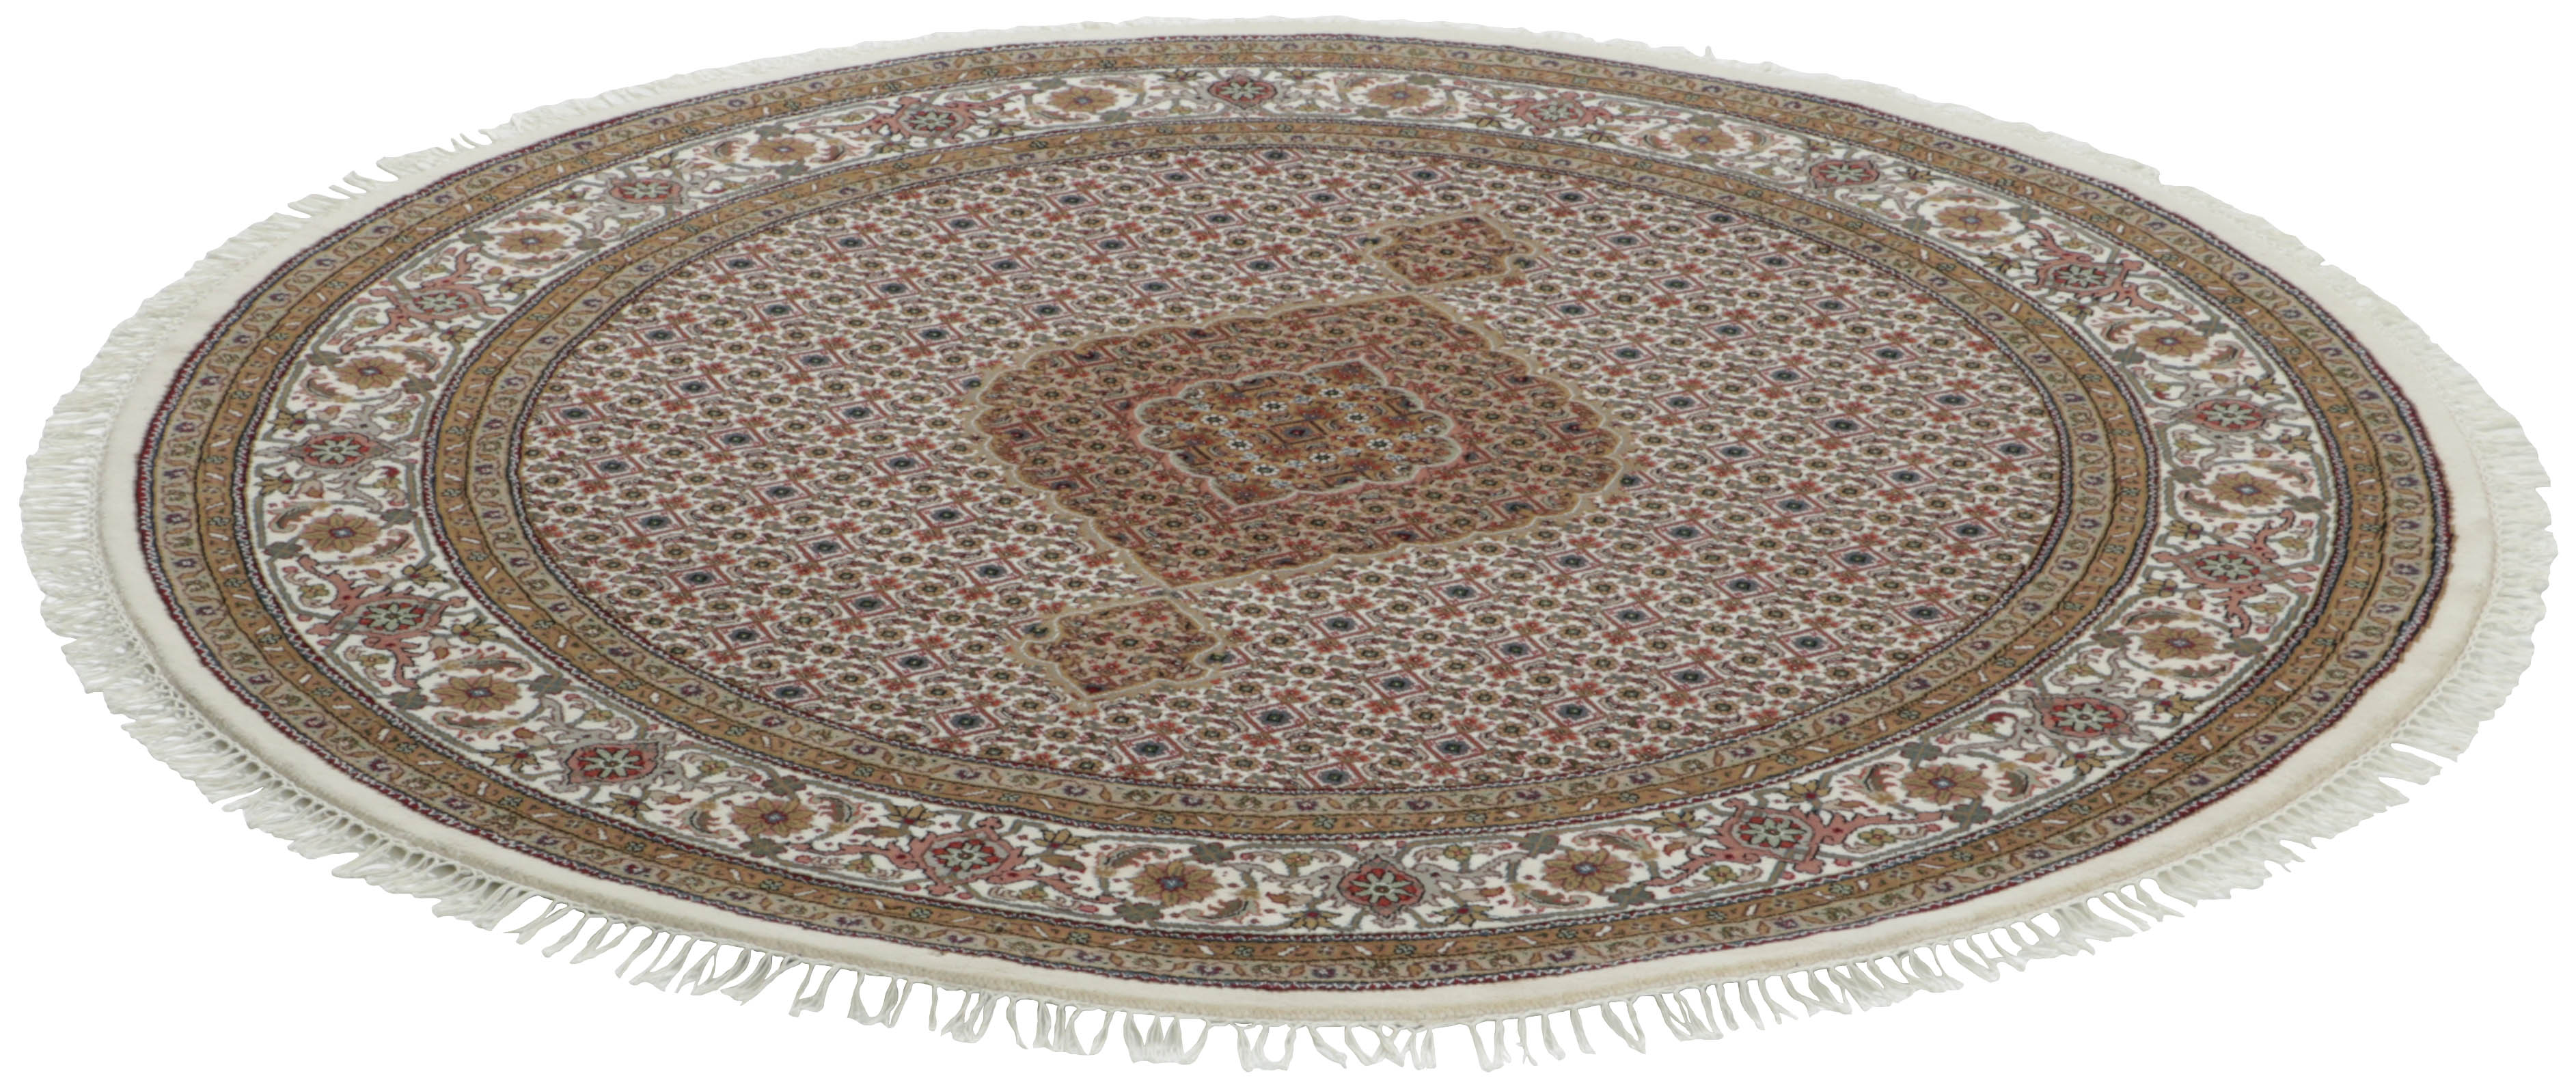 round Oriental rug with traditional geometric and floral design in black and beige